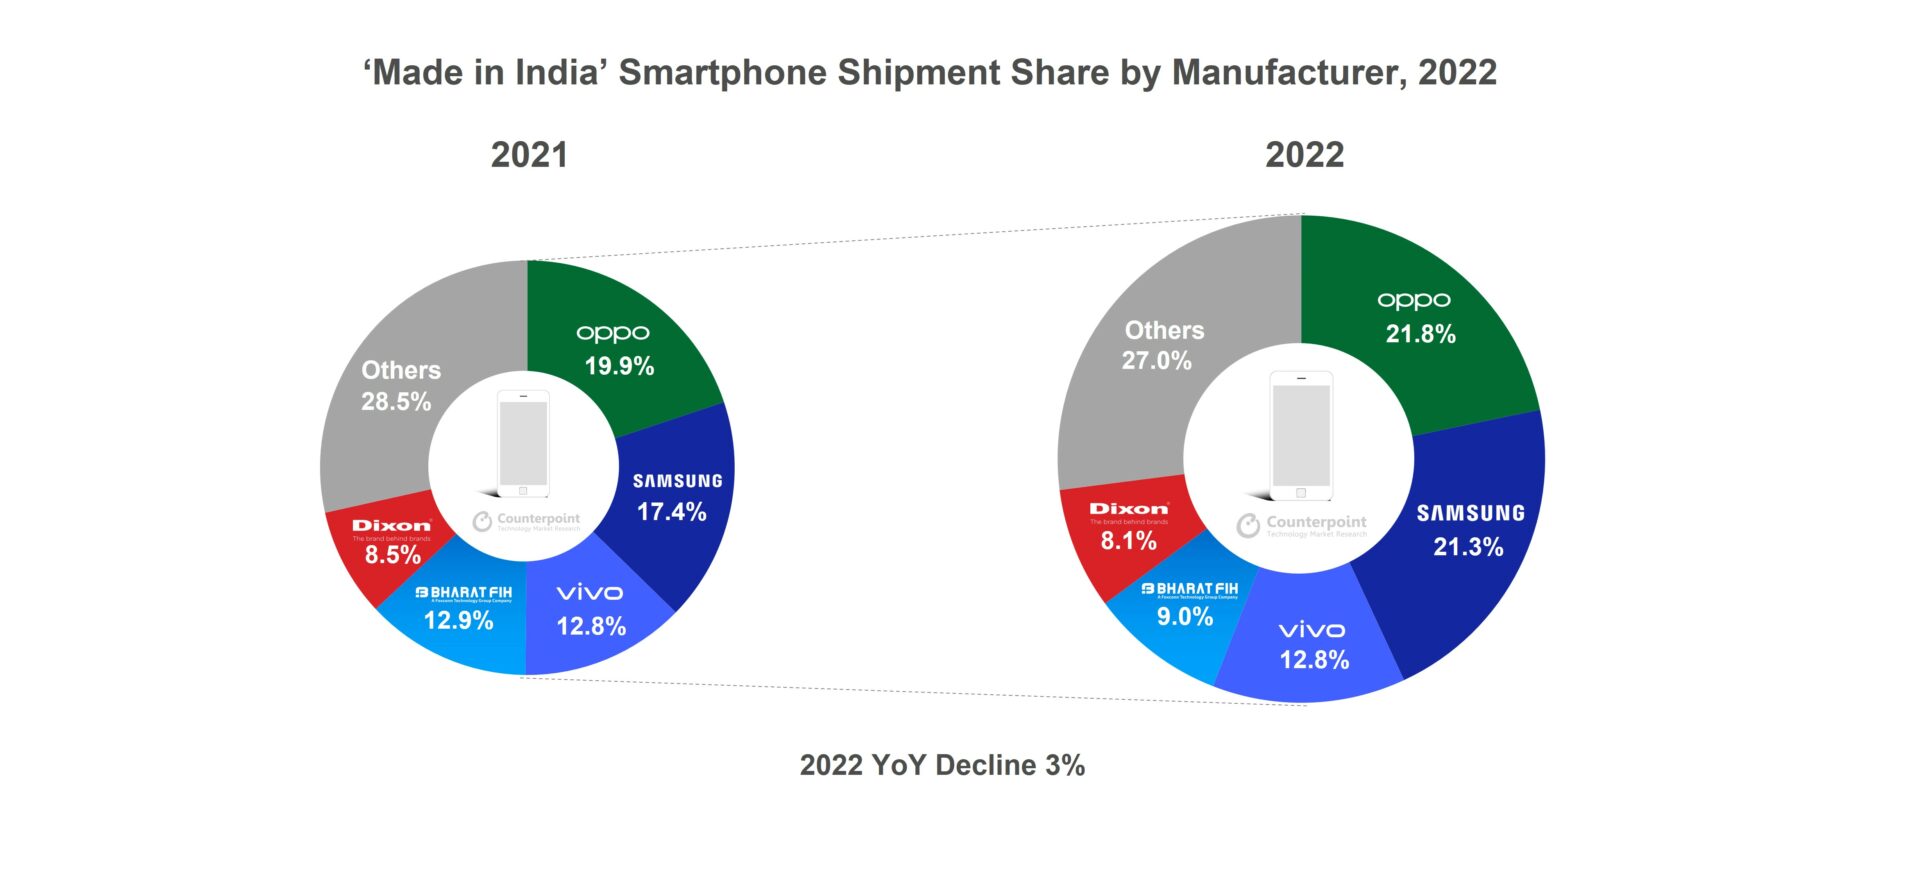 Made in India Smartphone Shipment Share by Manufacturer 2022